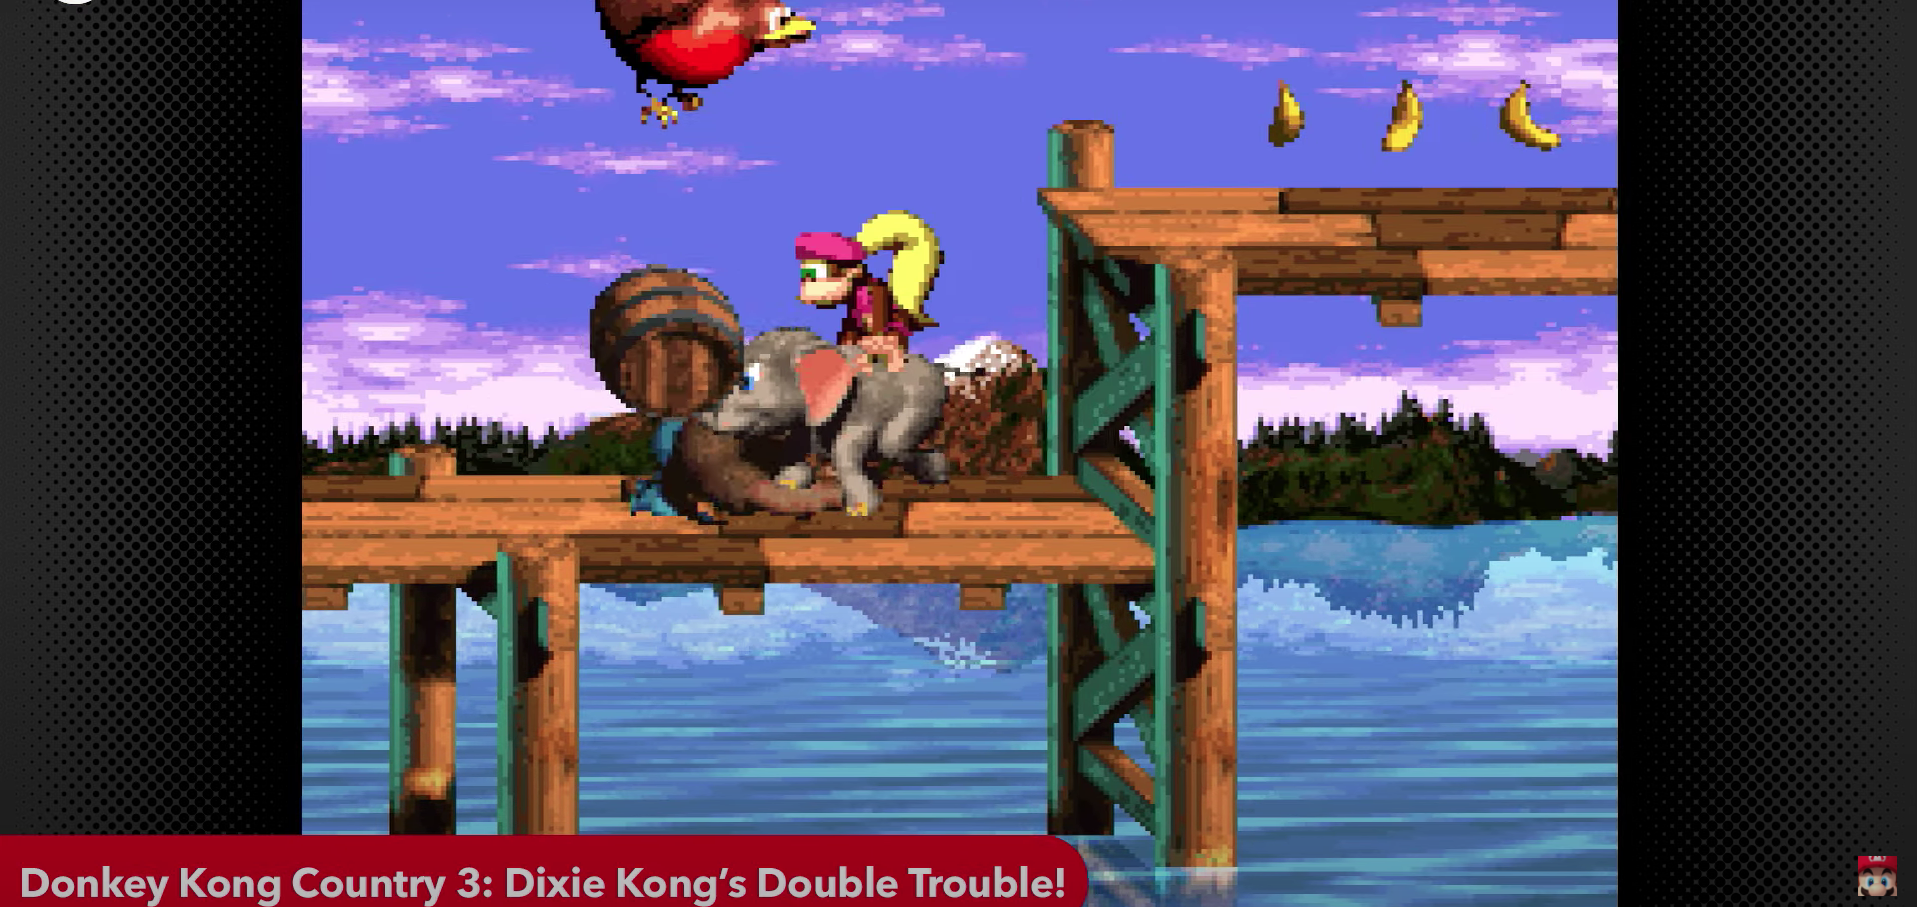 Donkey Kong Country 3 comes to Switch Online